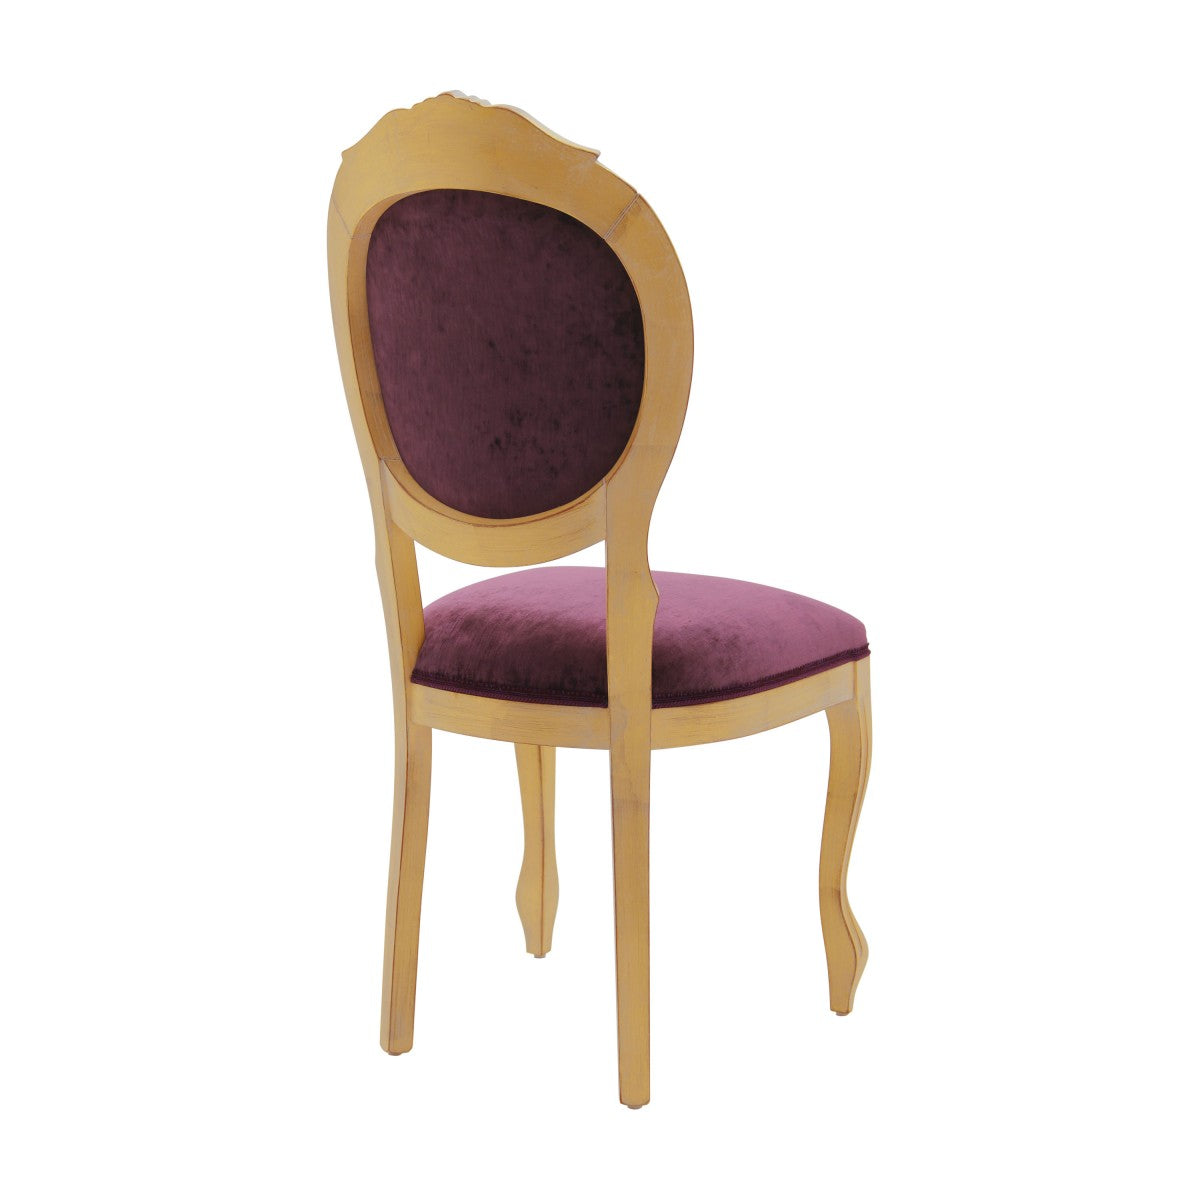 Sabry Bespoke Upholstered Classic Dining Chair MS206S Custom Made To Order